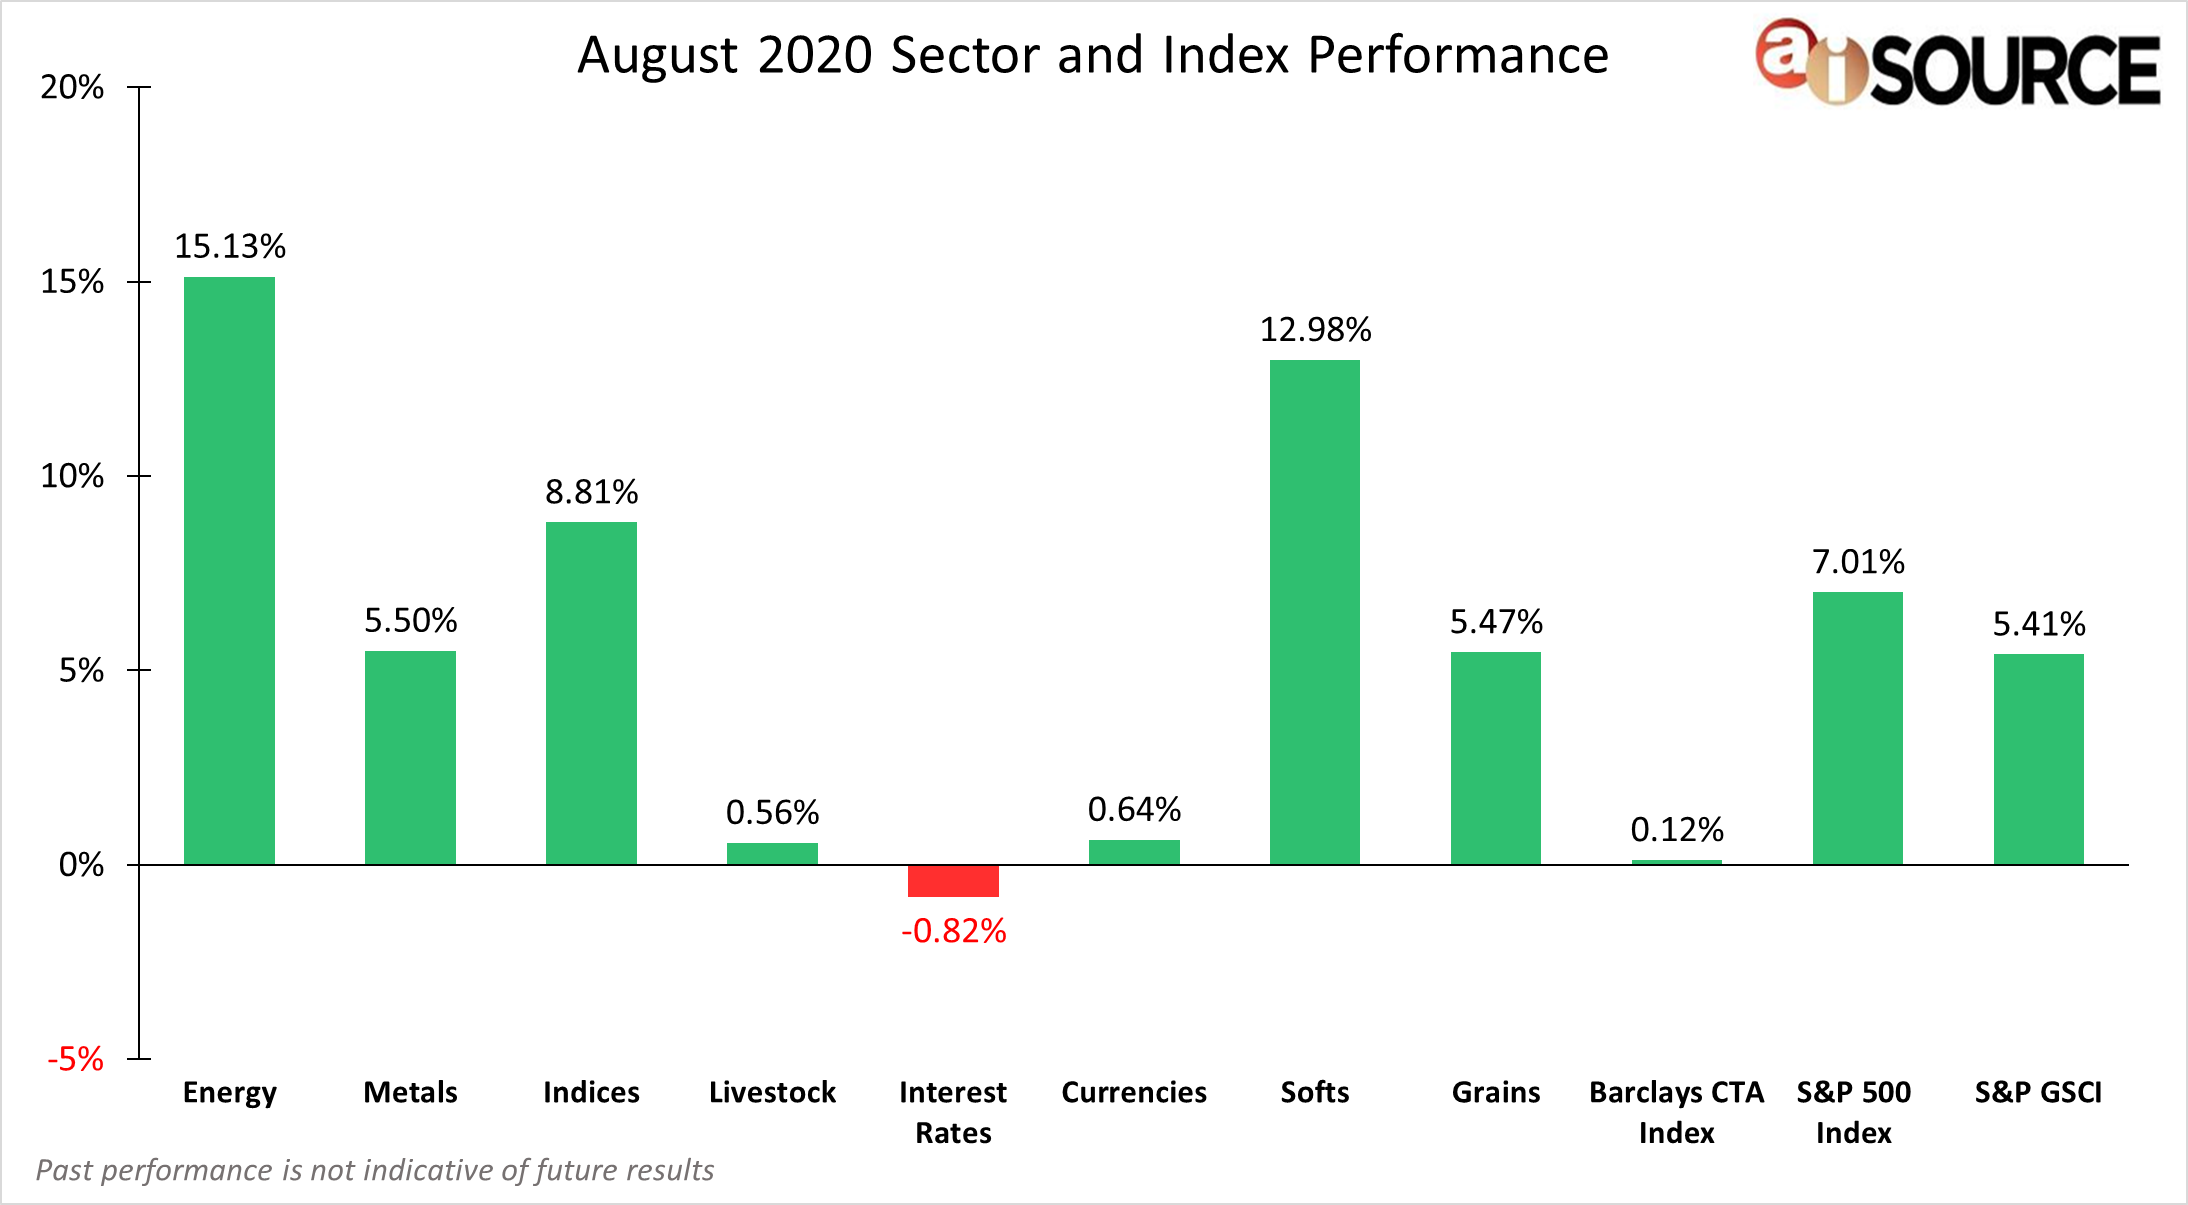 August 2020 Sector and Index Performance